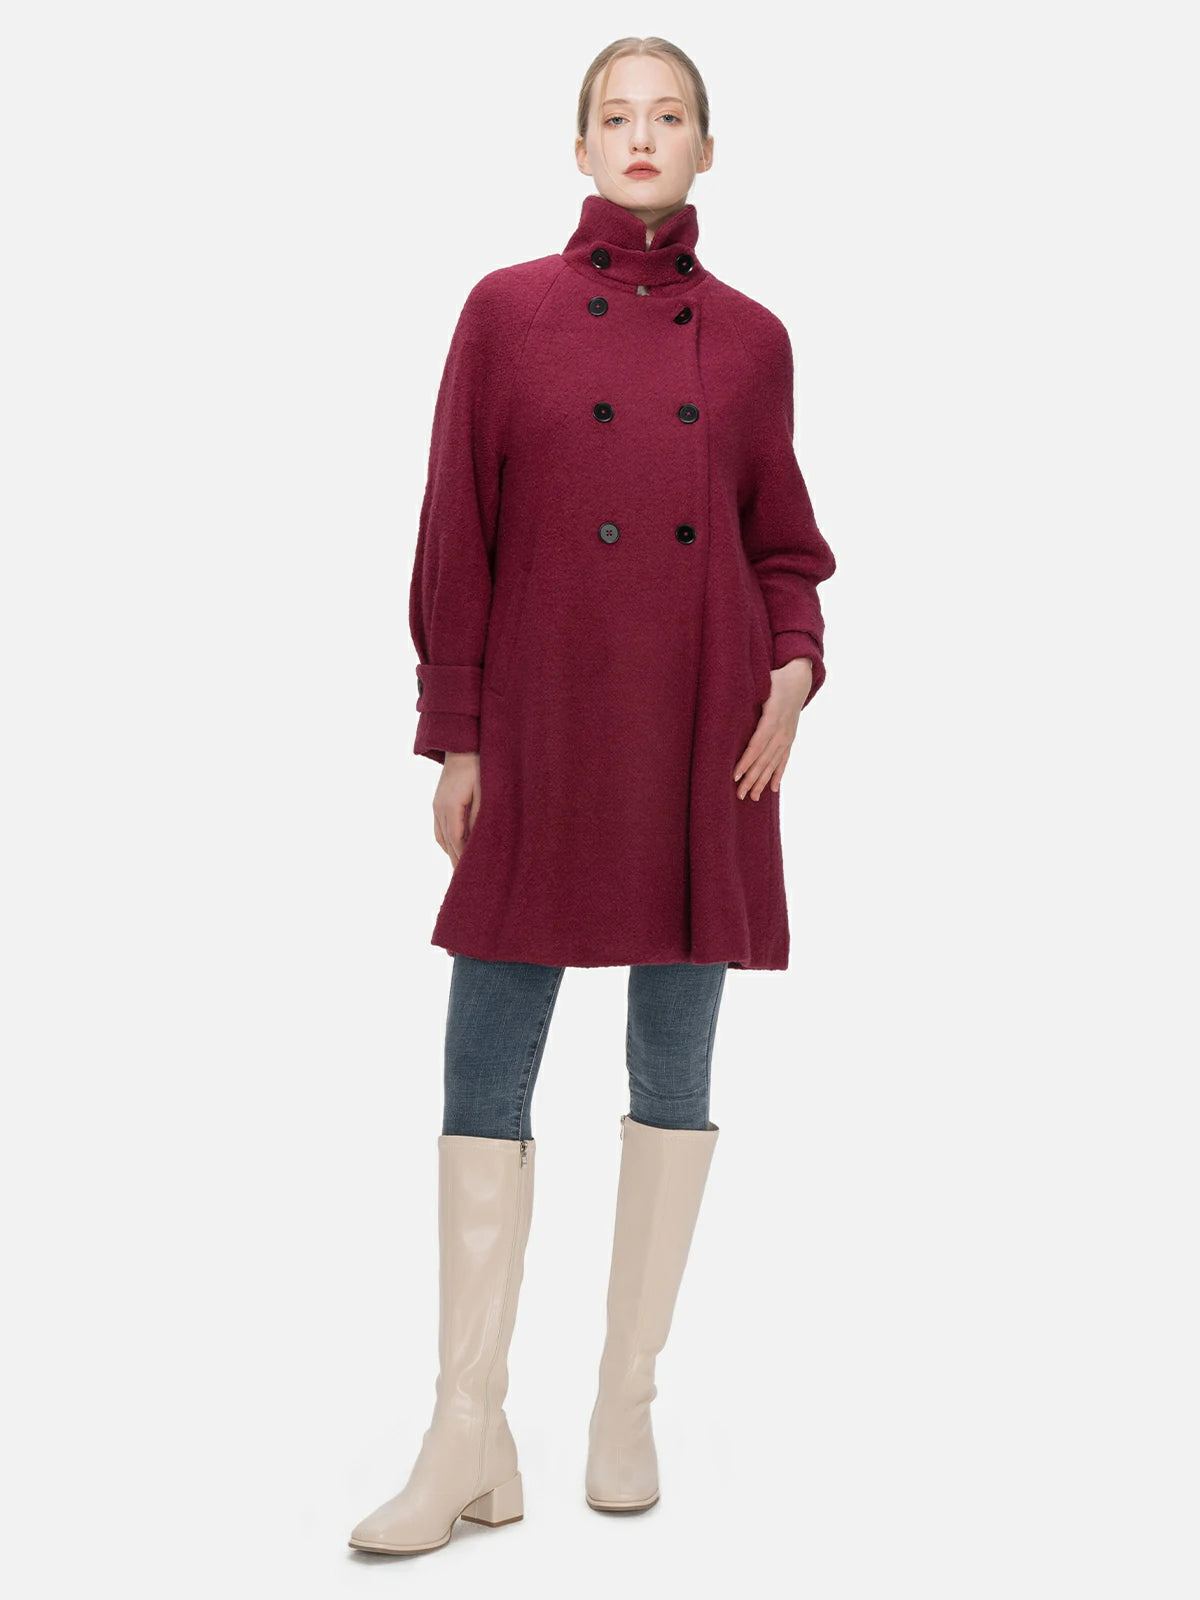 Discover the perfect fit in this deep magenta double-breasted wool coat, tailored to perfection with stand collar and lapel options, ensuring a versatile and confidently stylish addition to your winter wardrobe.